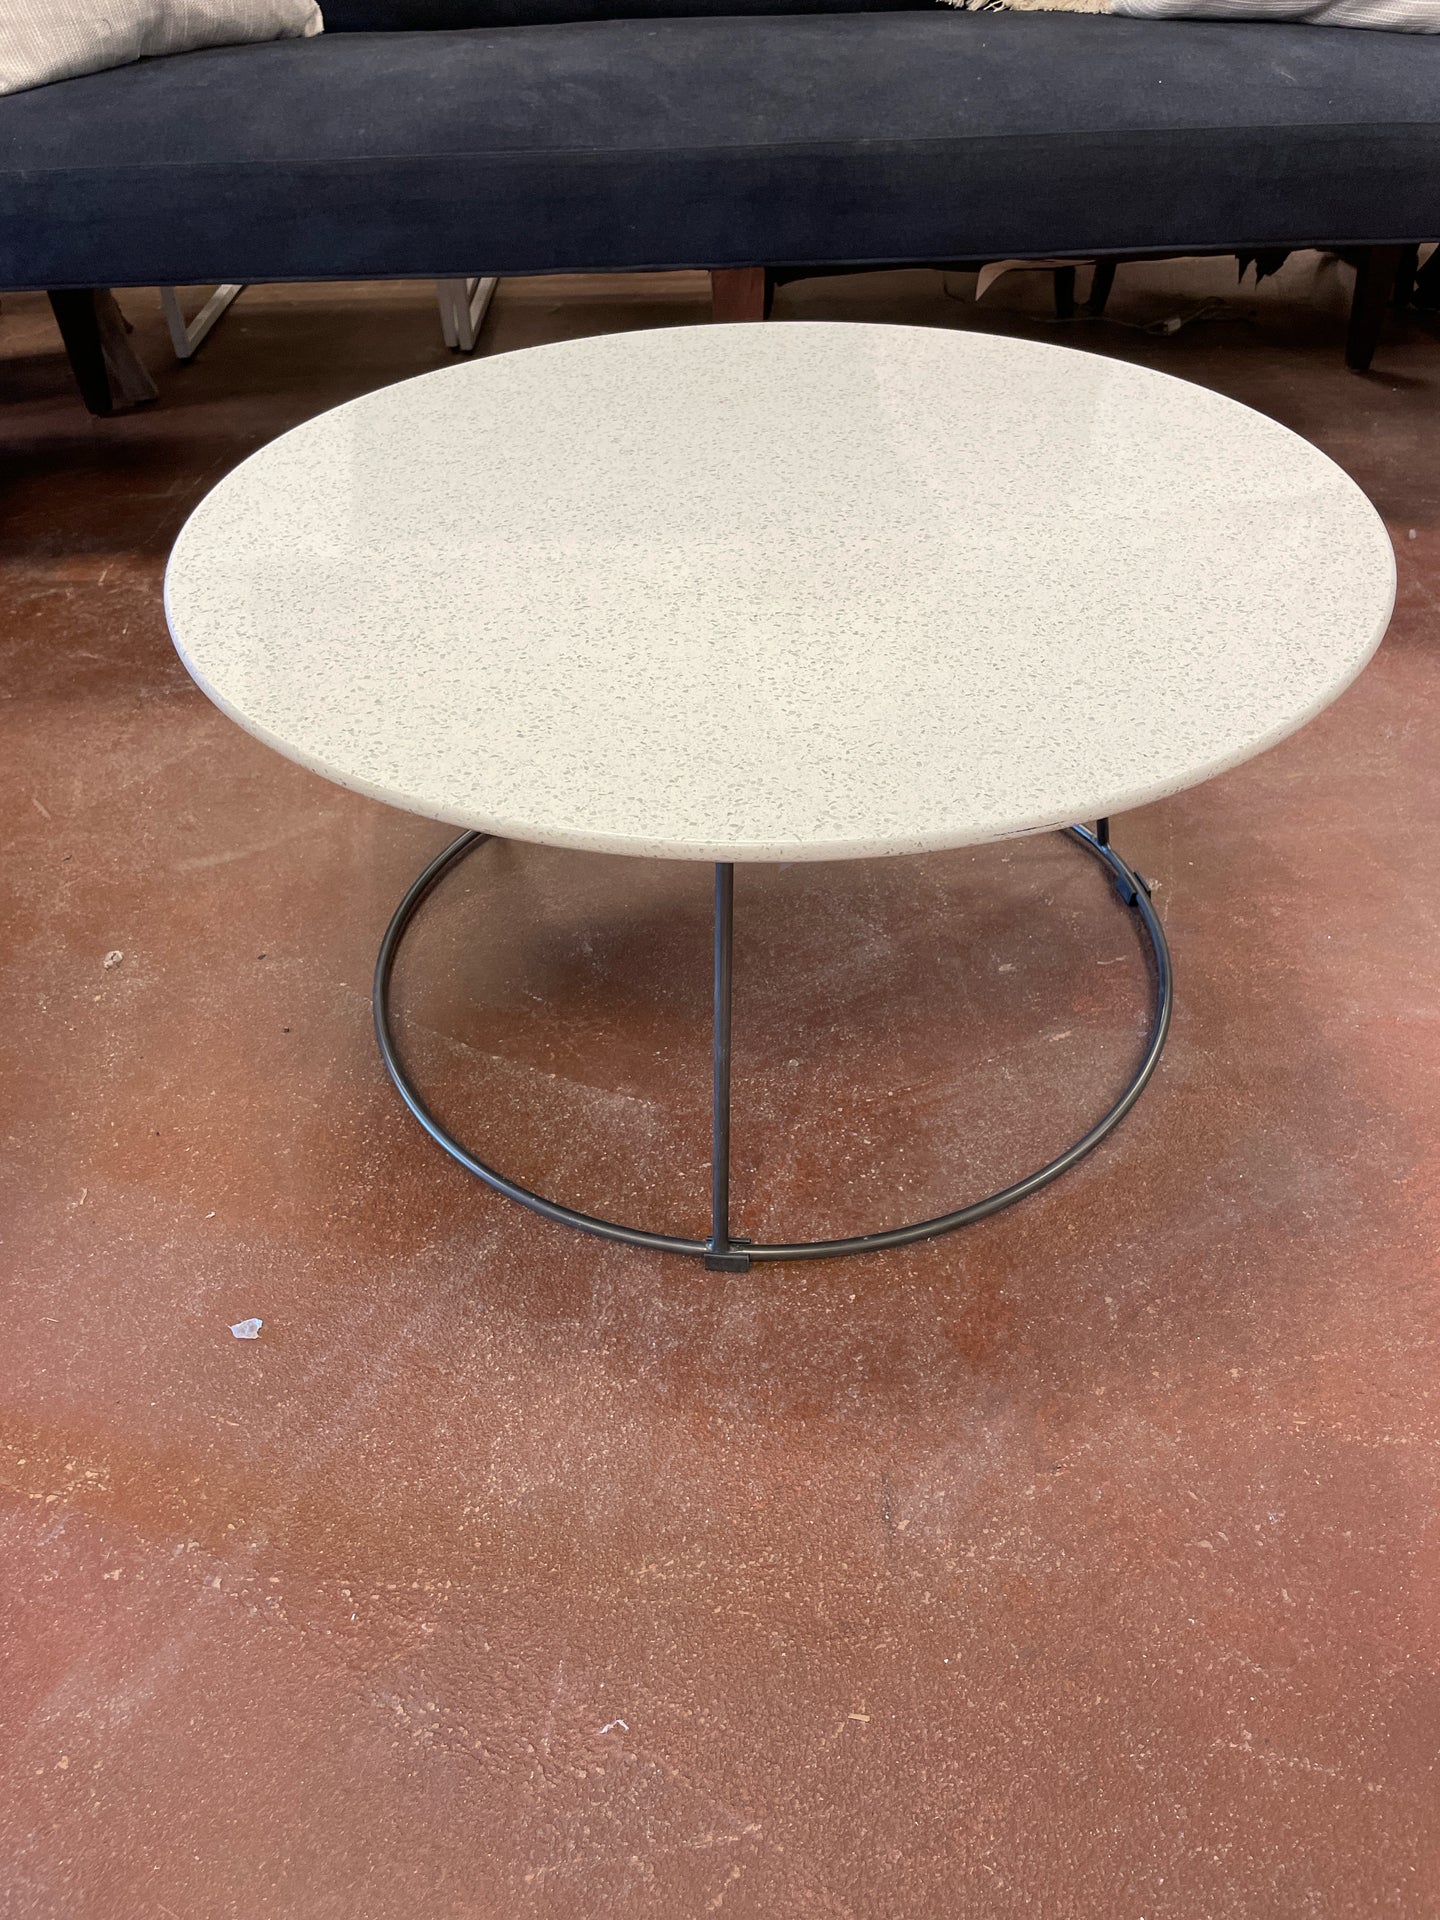 NEW - White Marble Top Coffee Table with Metal Base